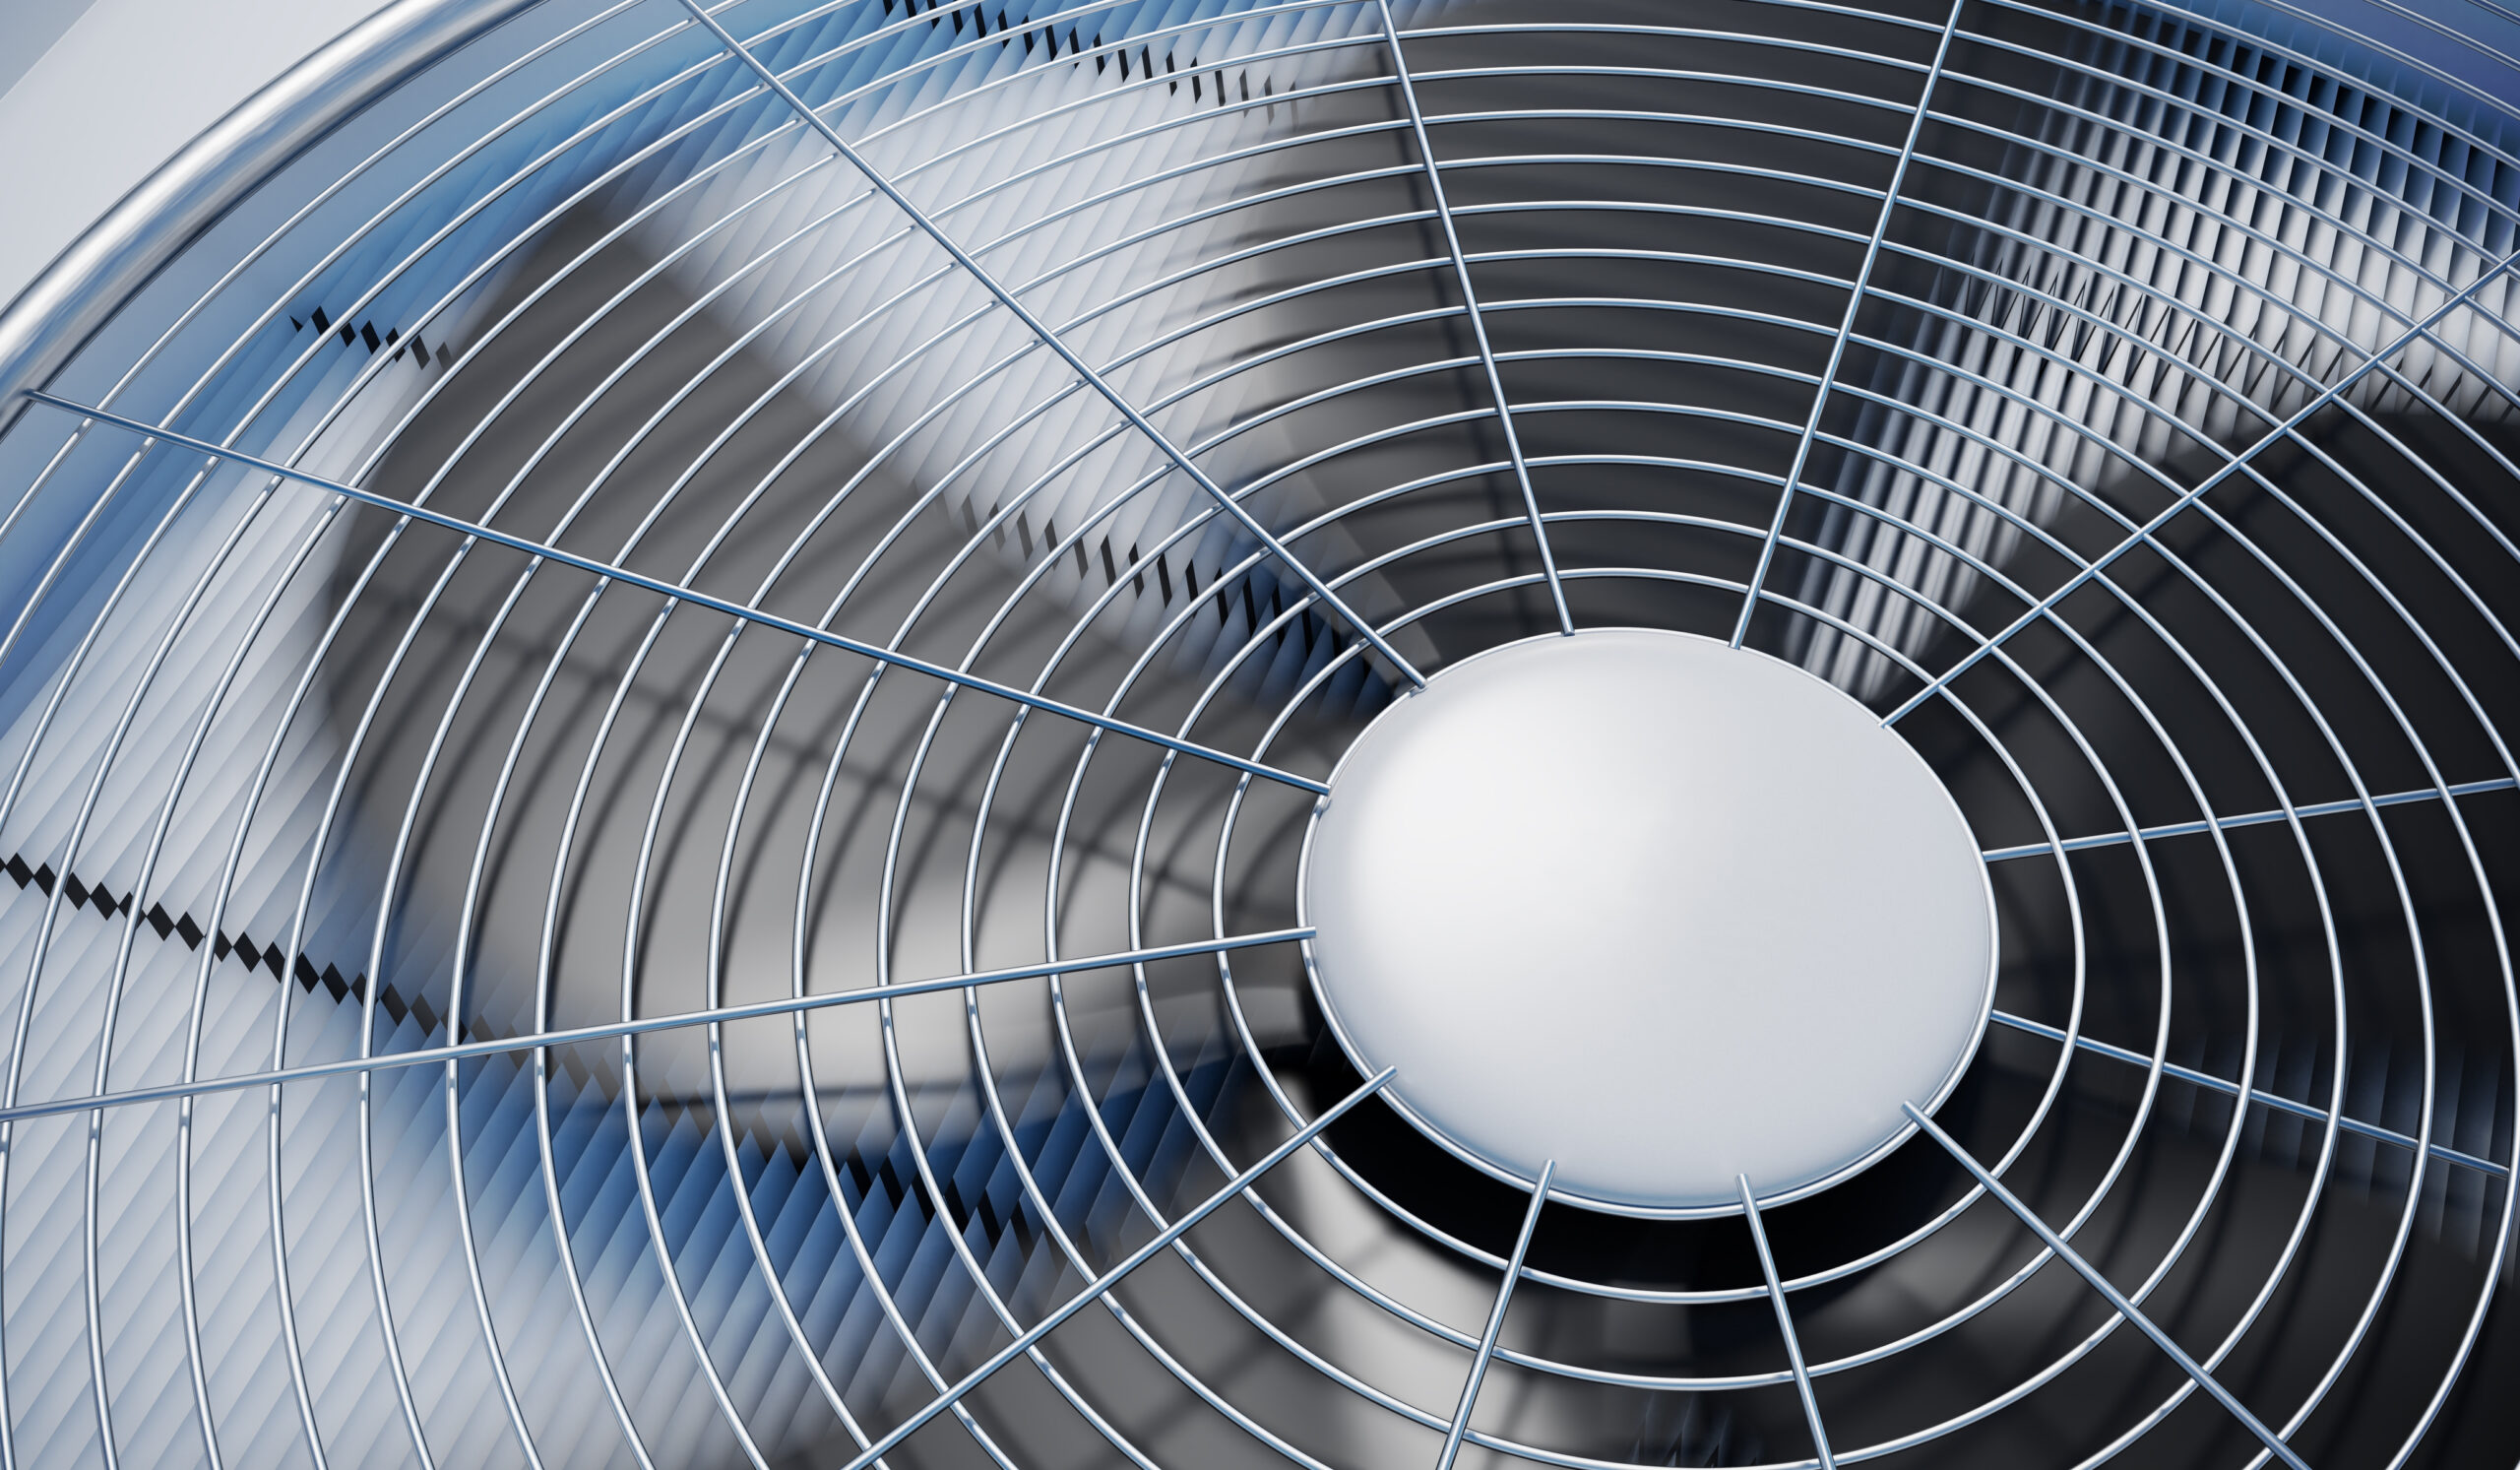 Close-up view of a fan spinning on an HVAC unit.